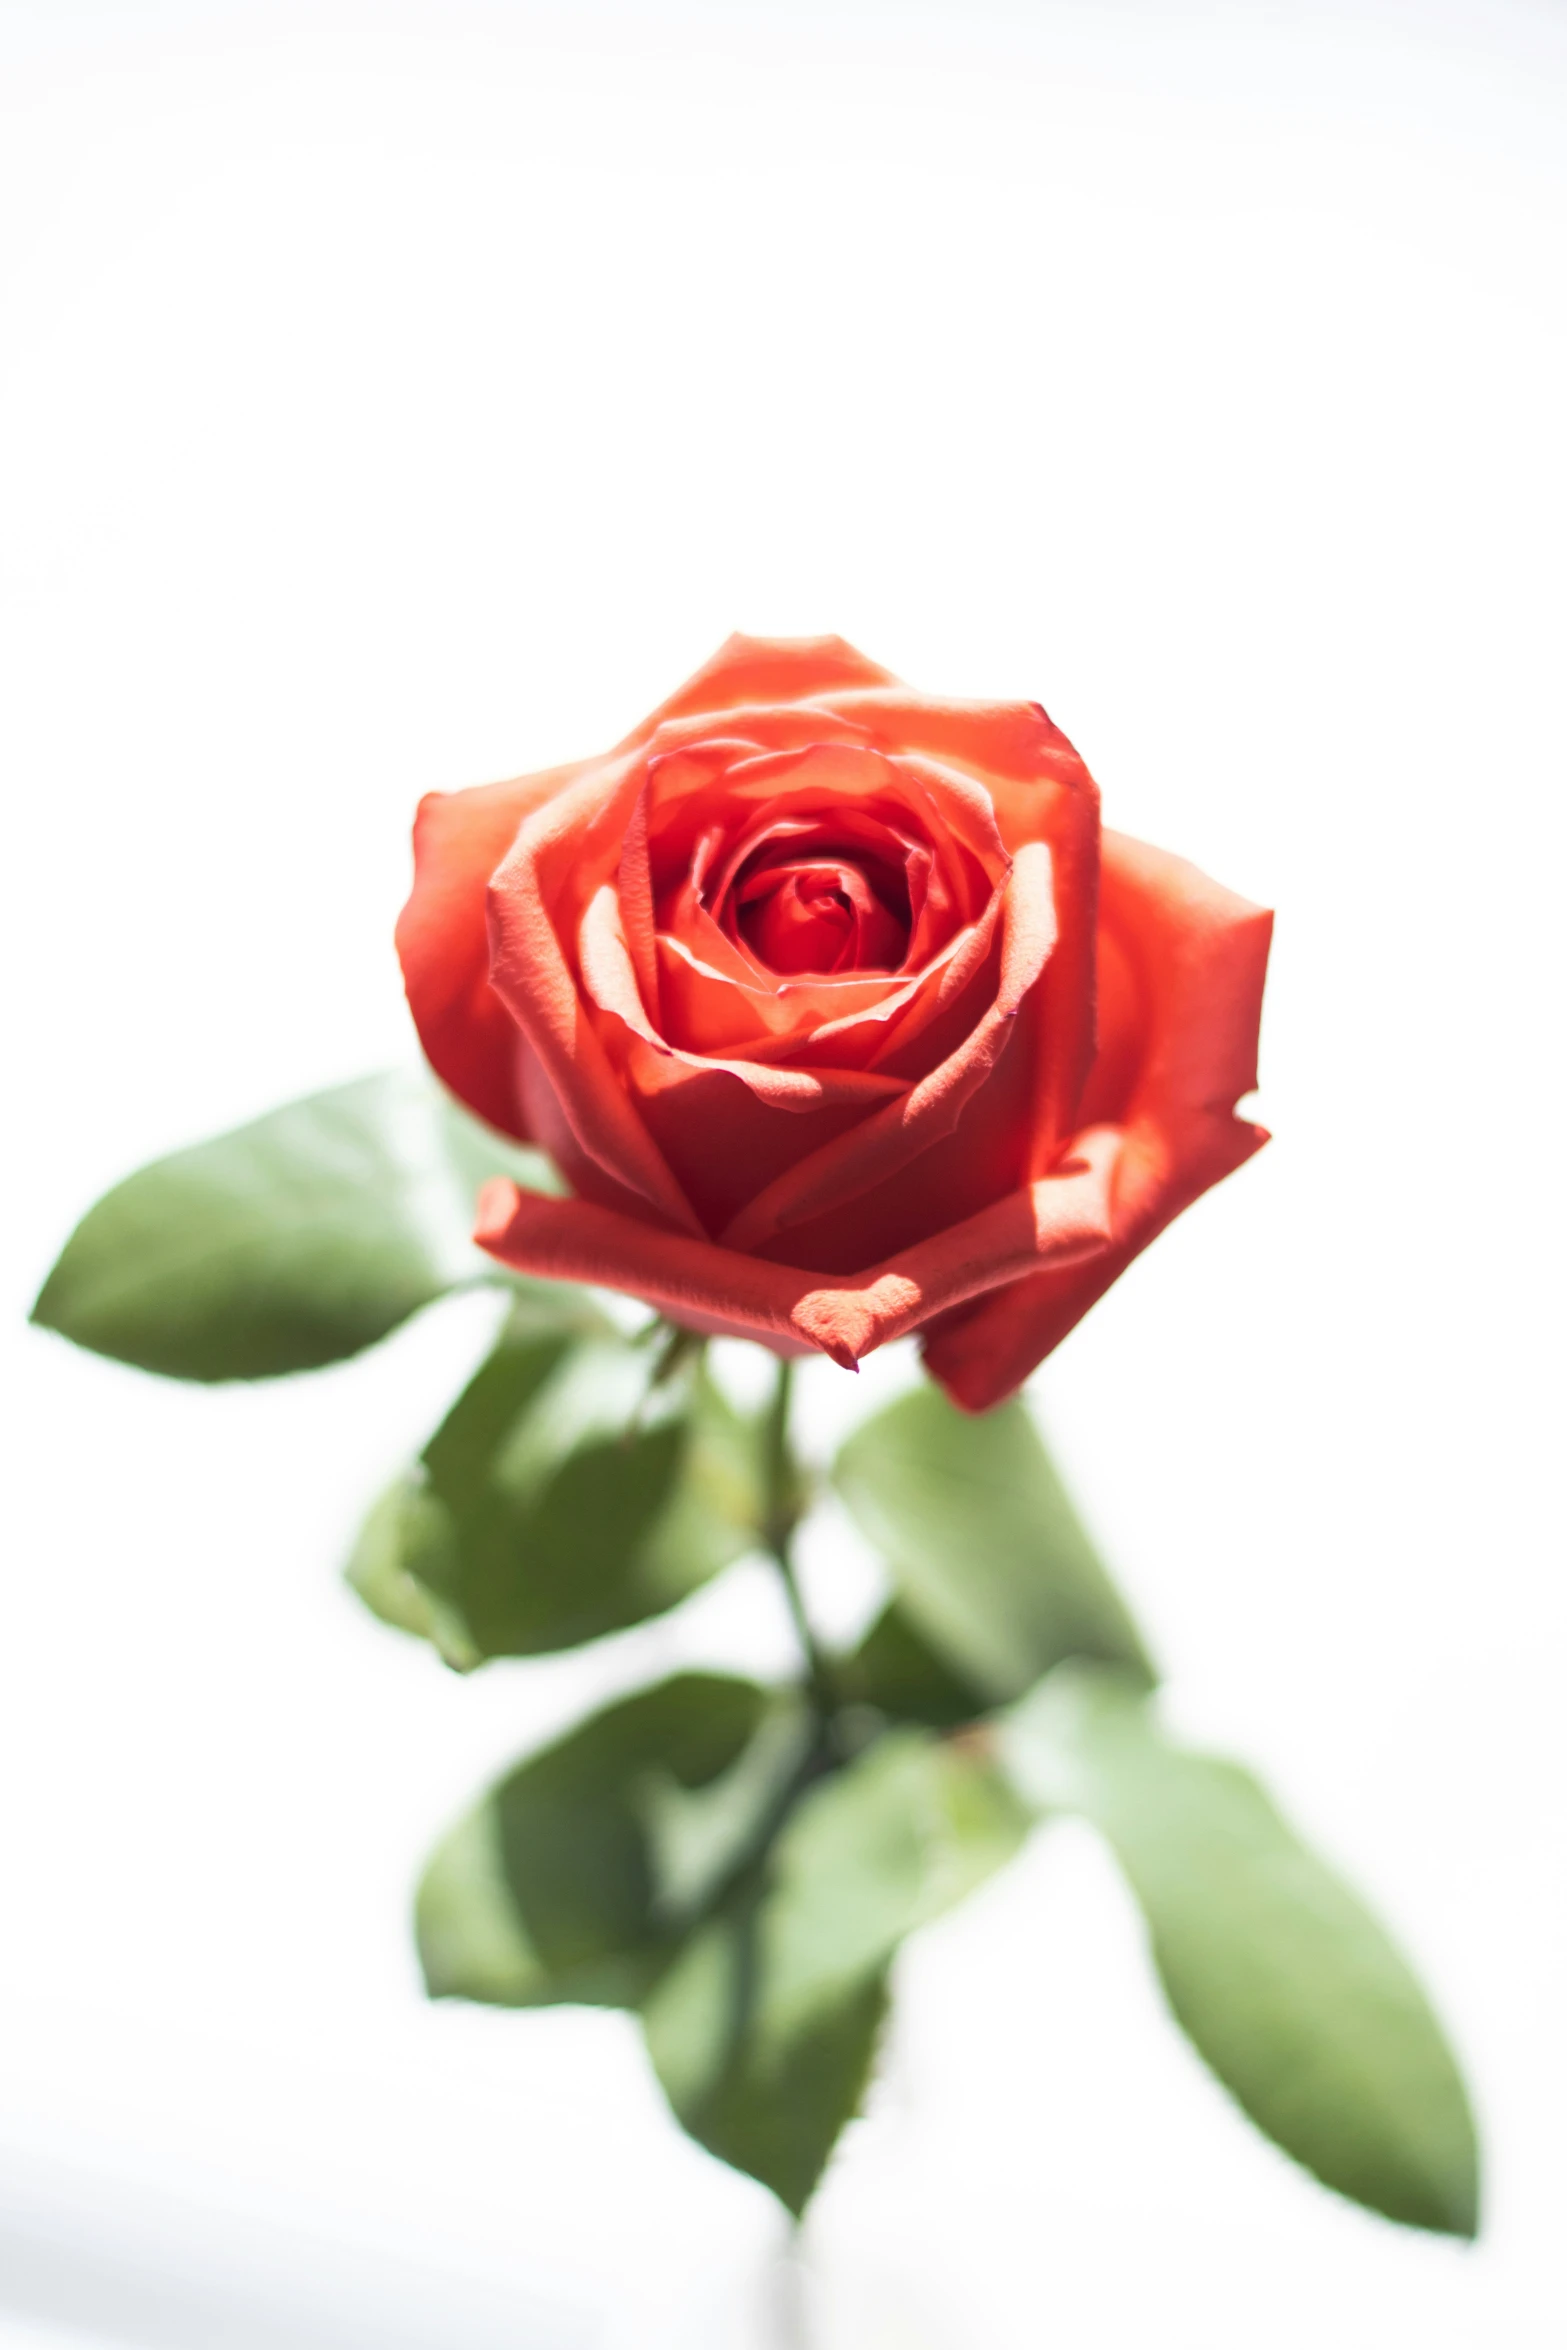 a single red rose with leaves is viewed from below